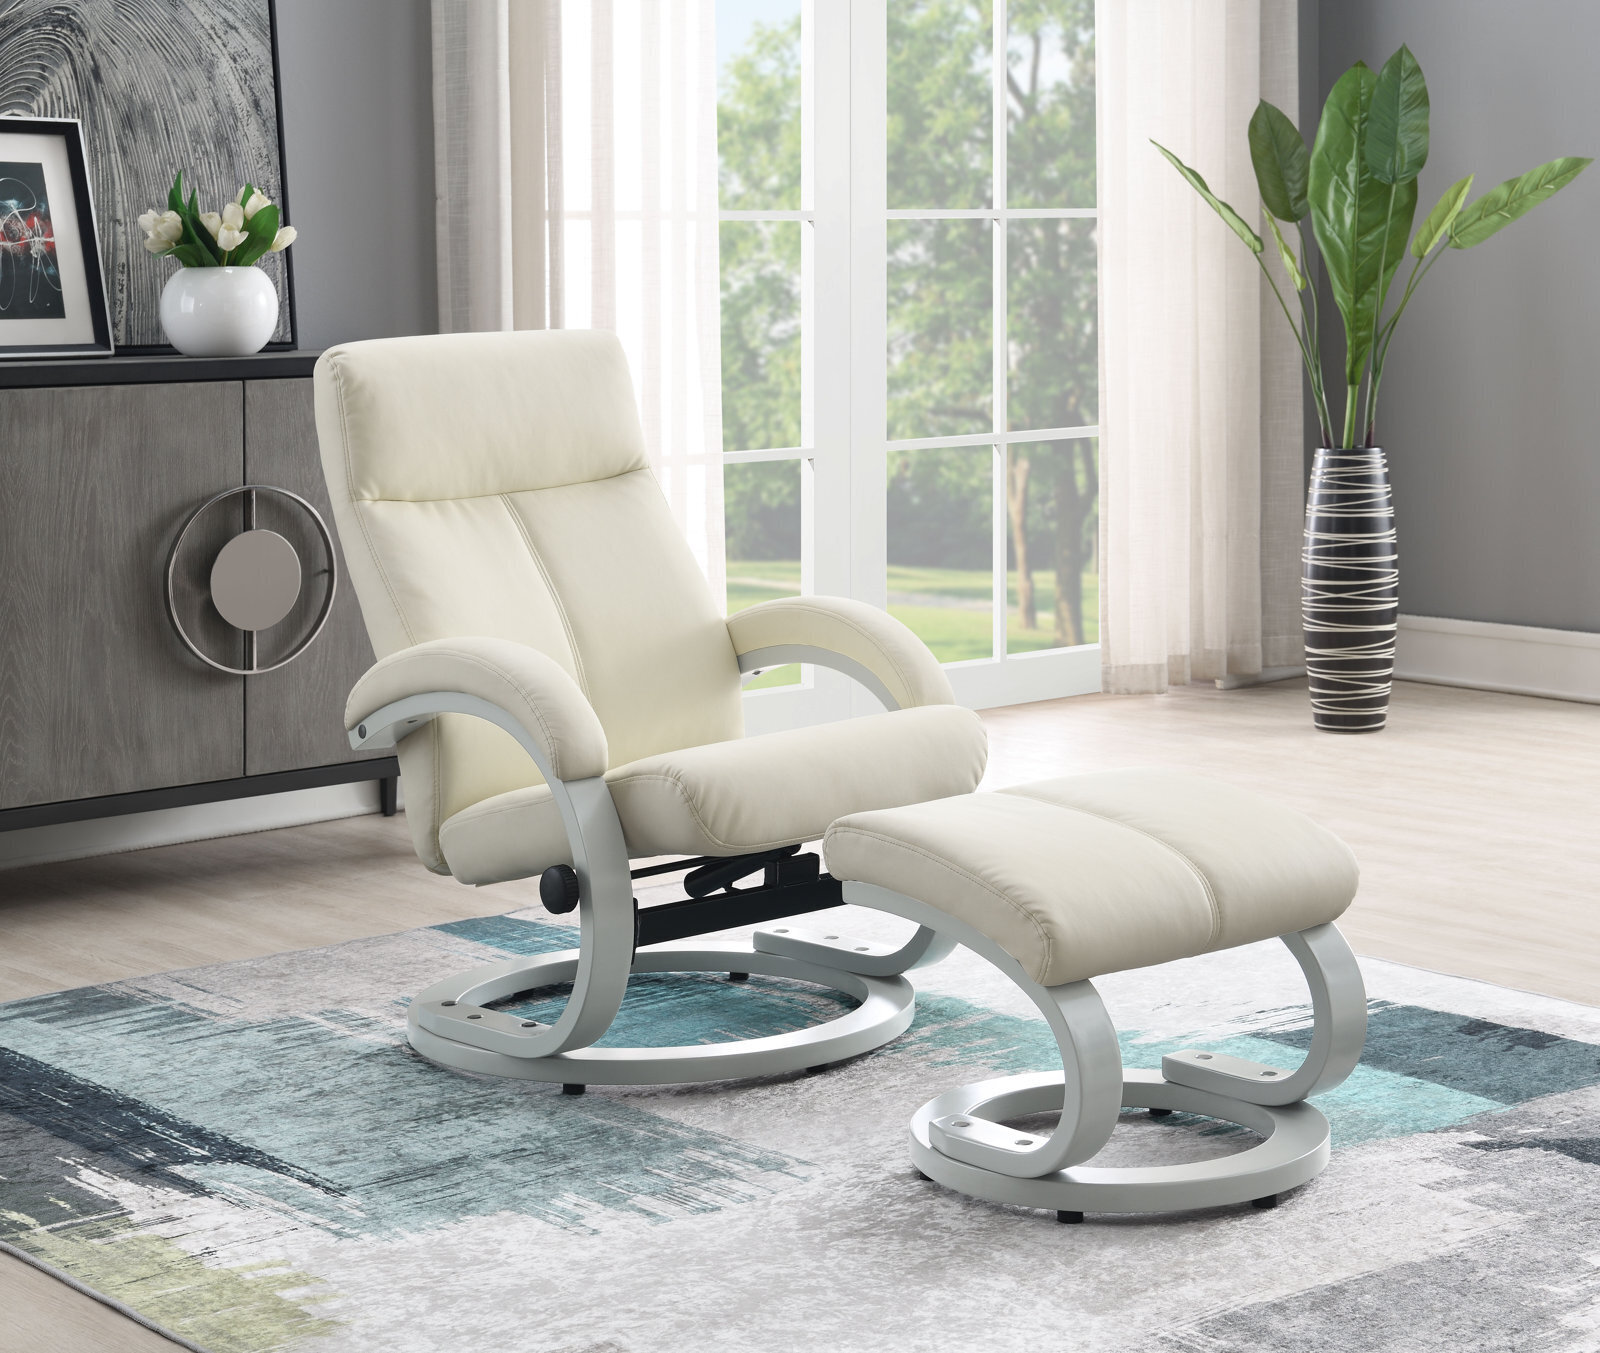 A Stylish Recliner With Footrest